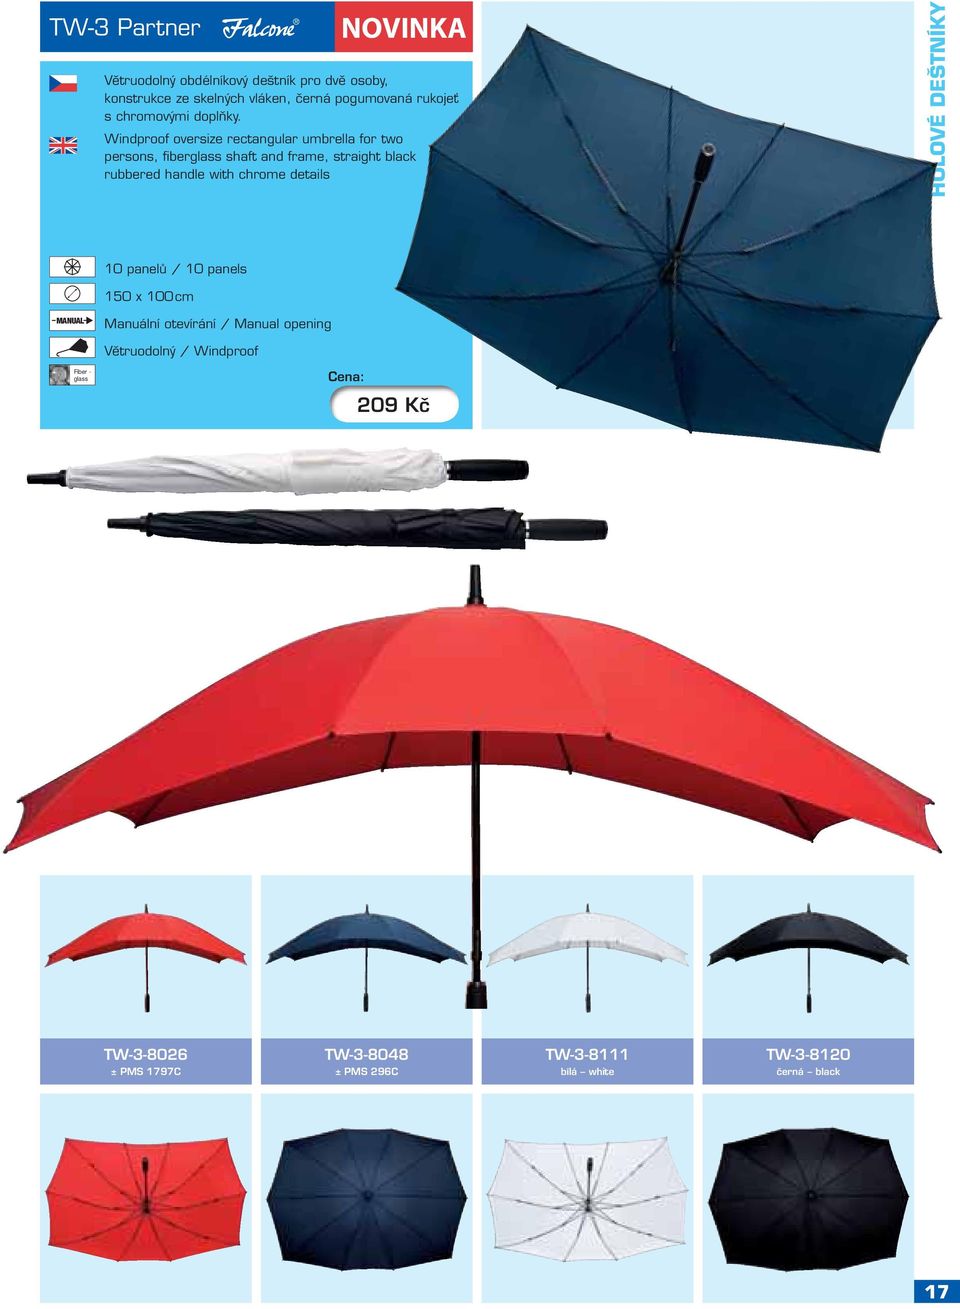 Windproof oversize rectangular umbrella for two persons, fiberglass shaft and frame, straight black rubbered handle with